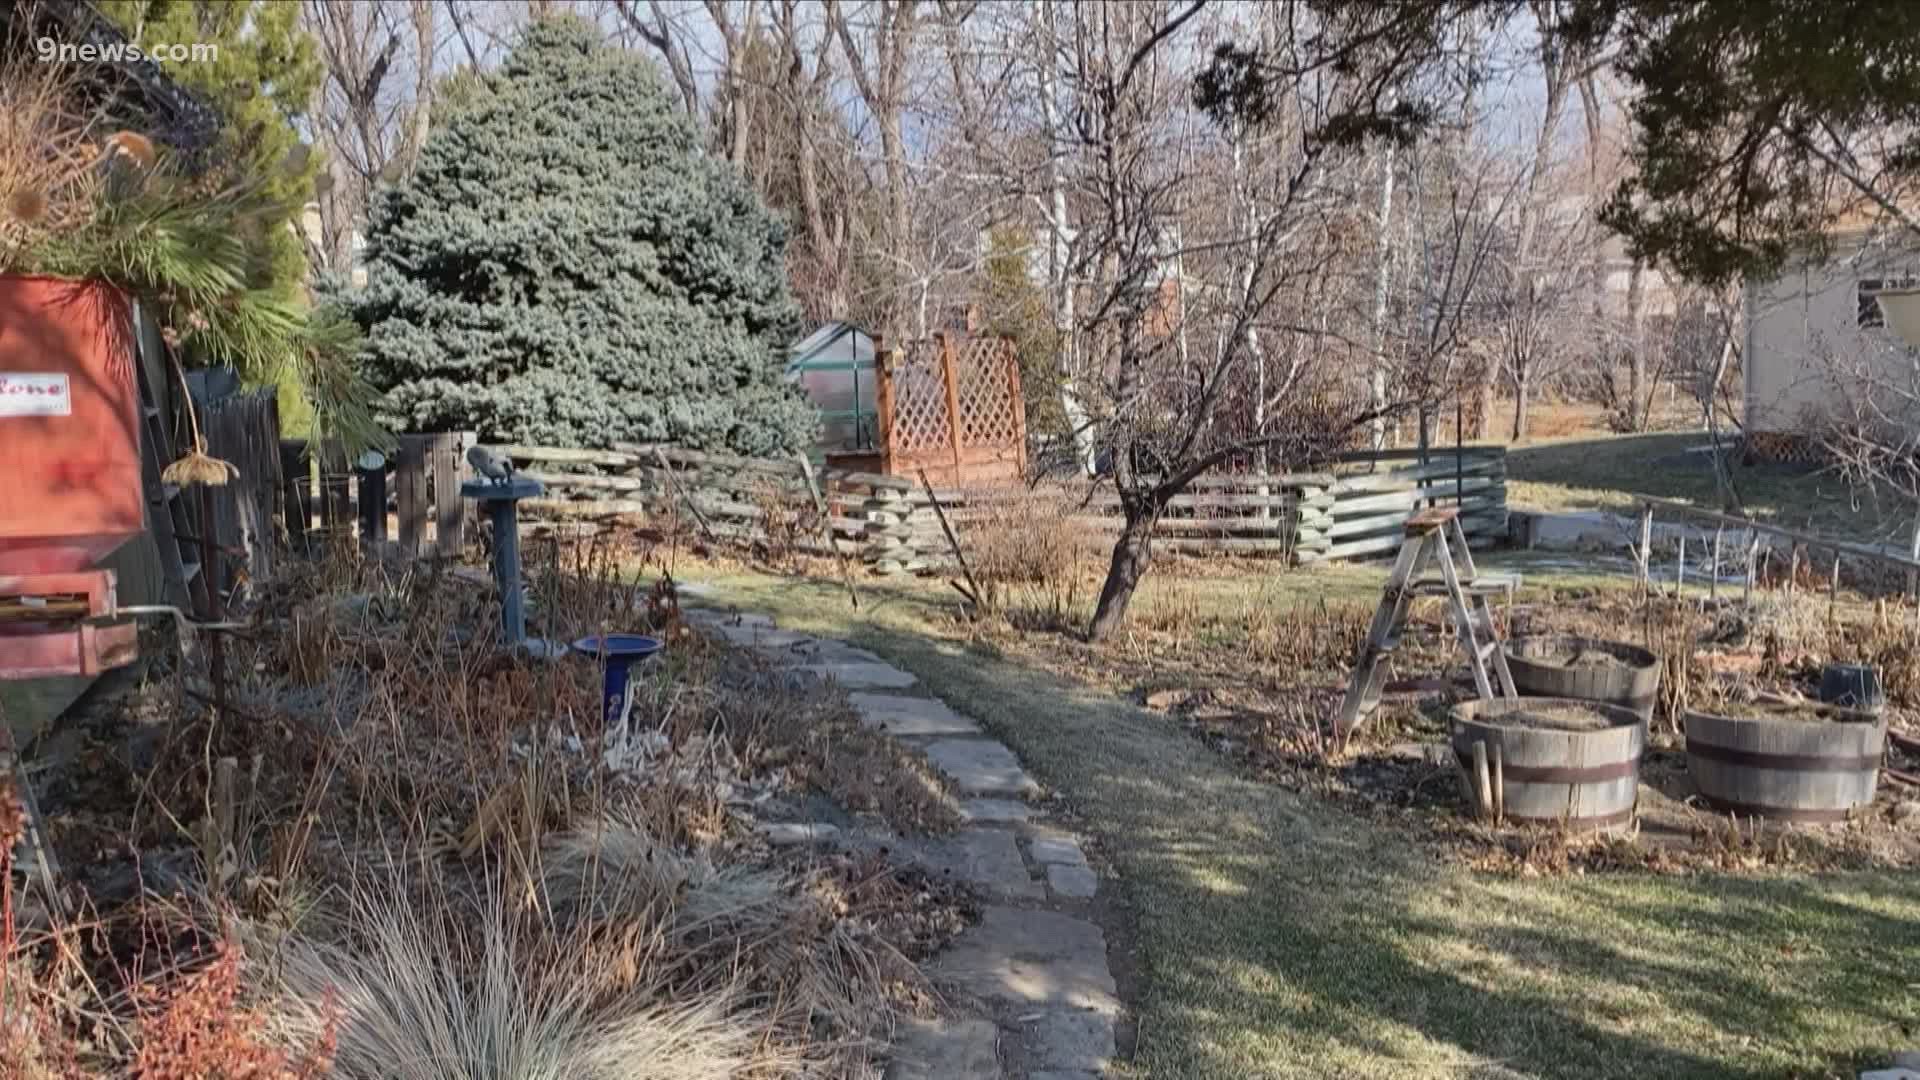 Because Colorado has dry air, low precipitation and big swings in temperatures, winter watering is crucial to the success of our gardens come spring.